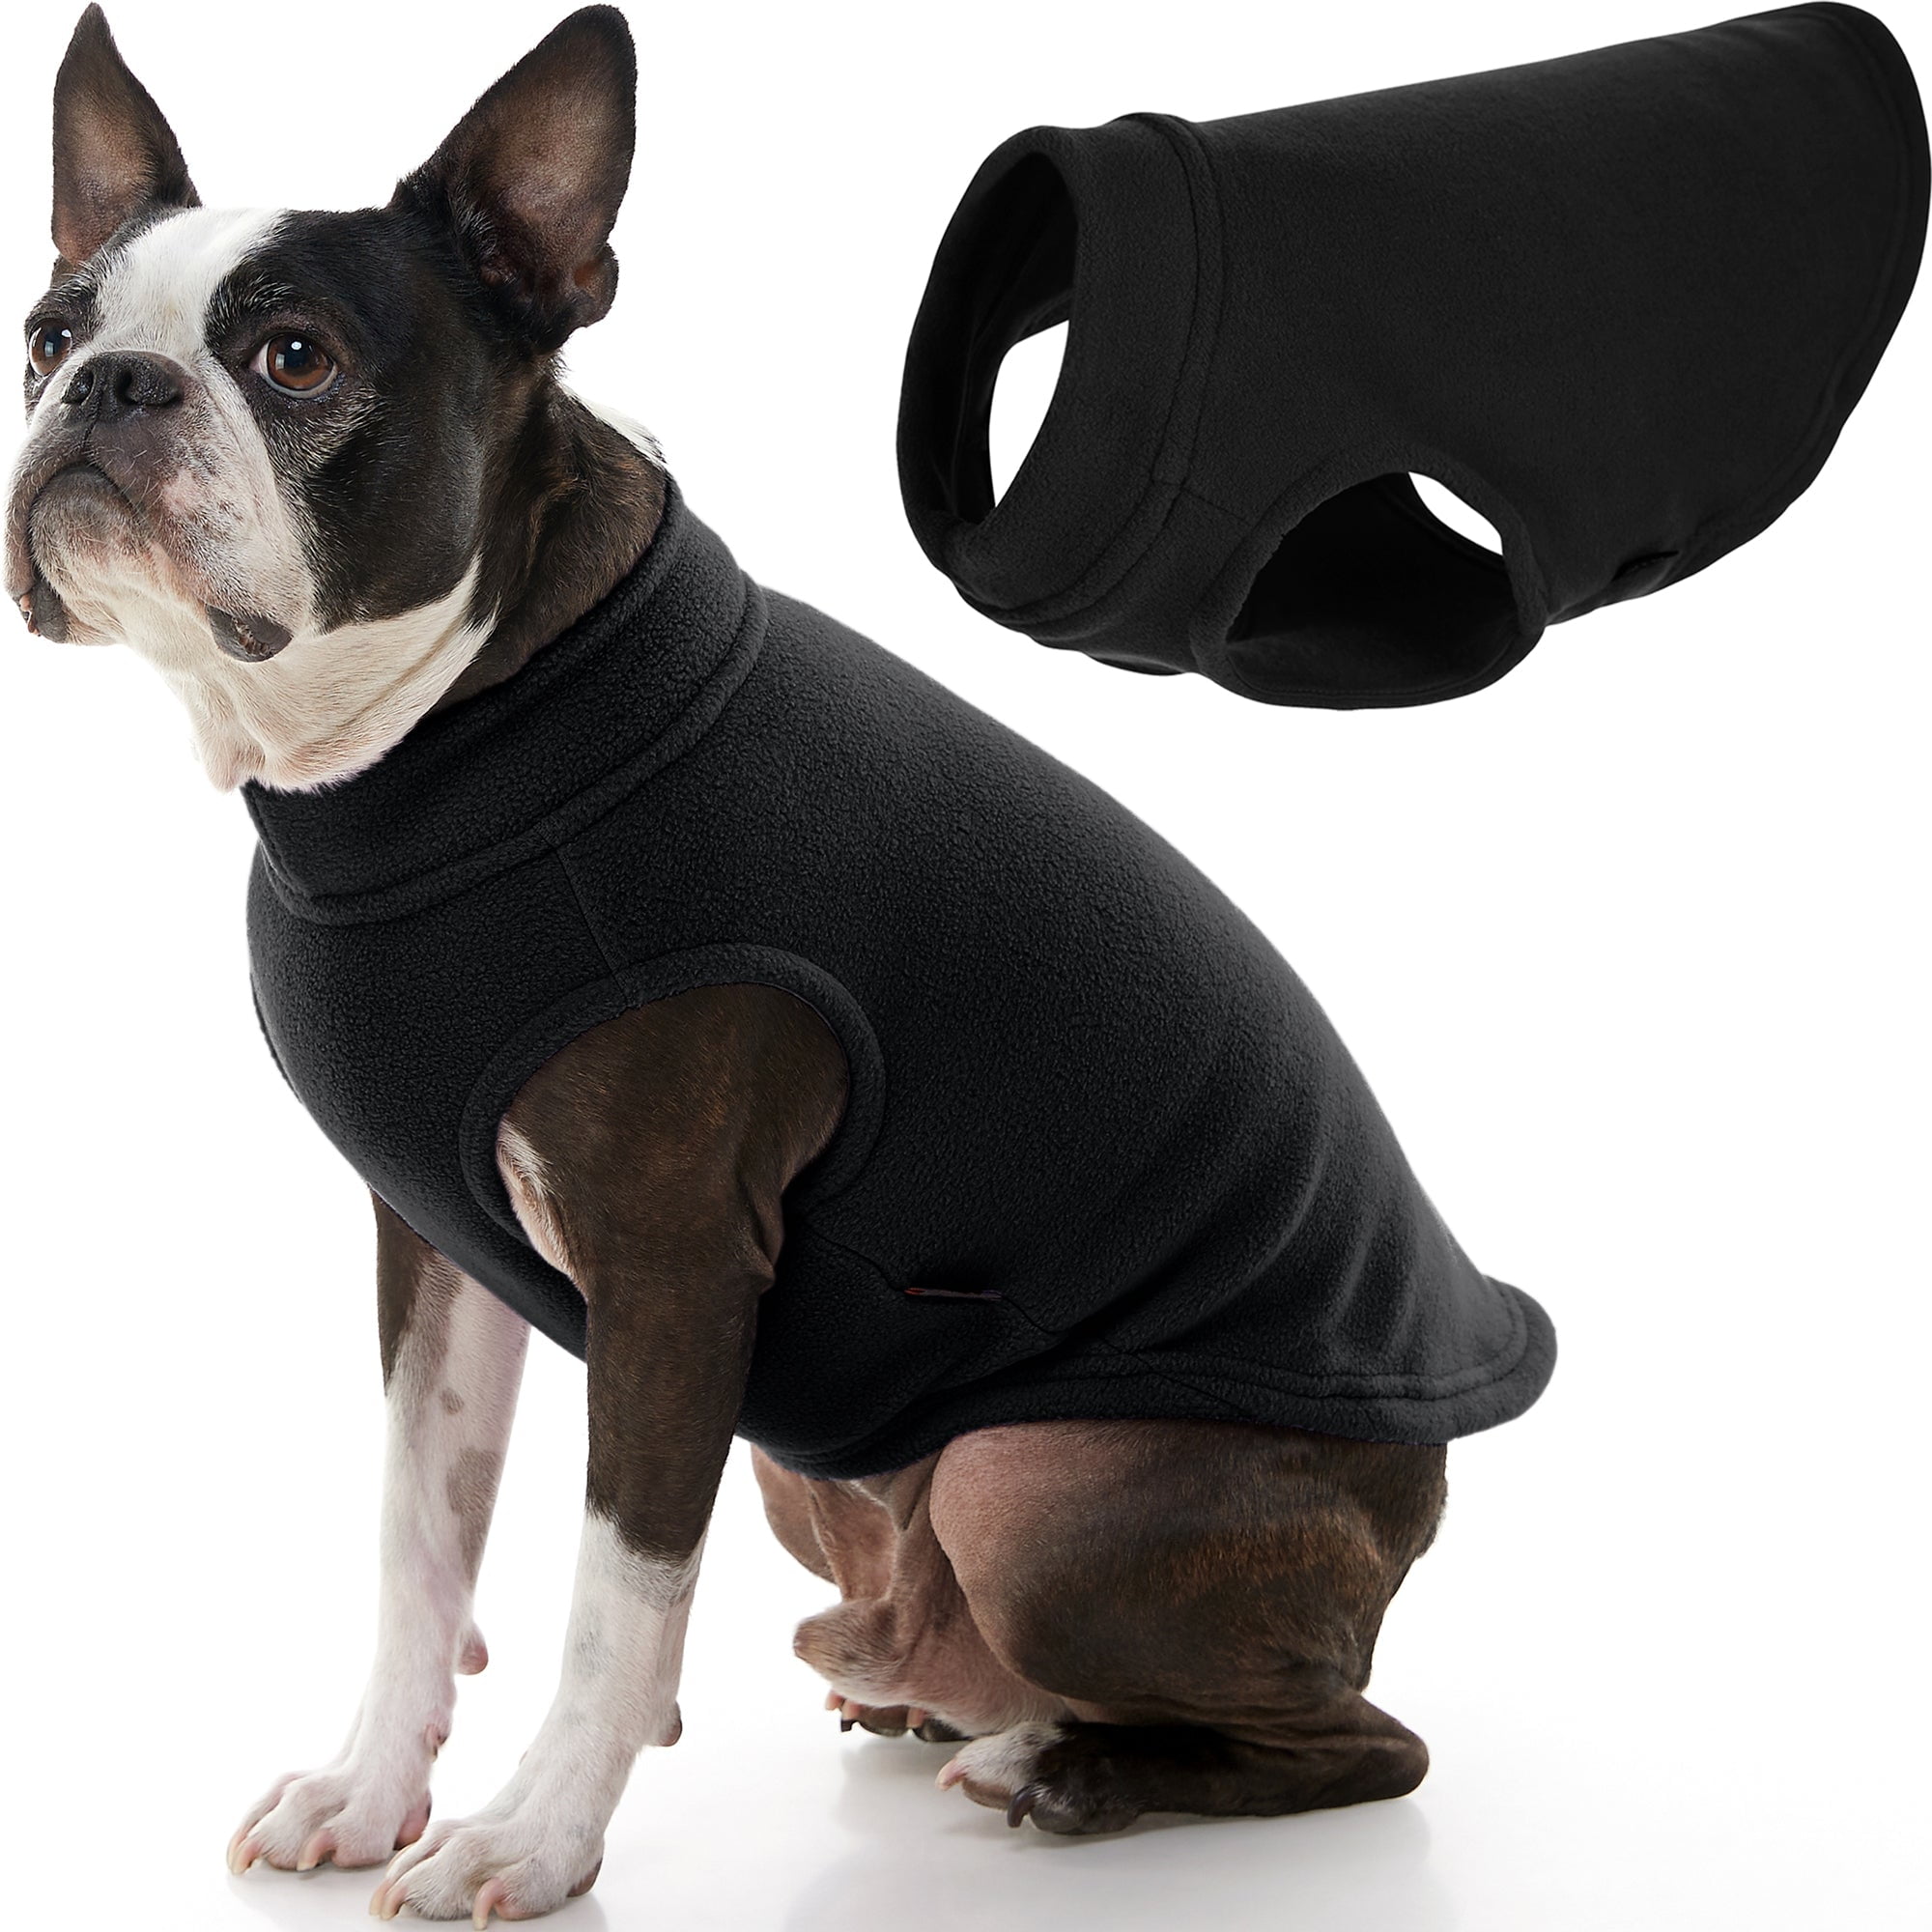 Gooby Stretch Fleece Vest - Black, Large - Warm Pullover Stretchable Soft  Fleece For Dogs with Multiple Colors and Sizes Indoor and Outdoor Use 